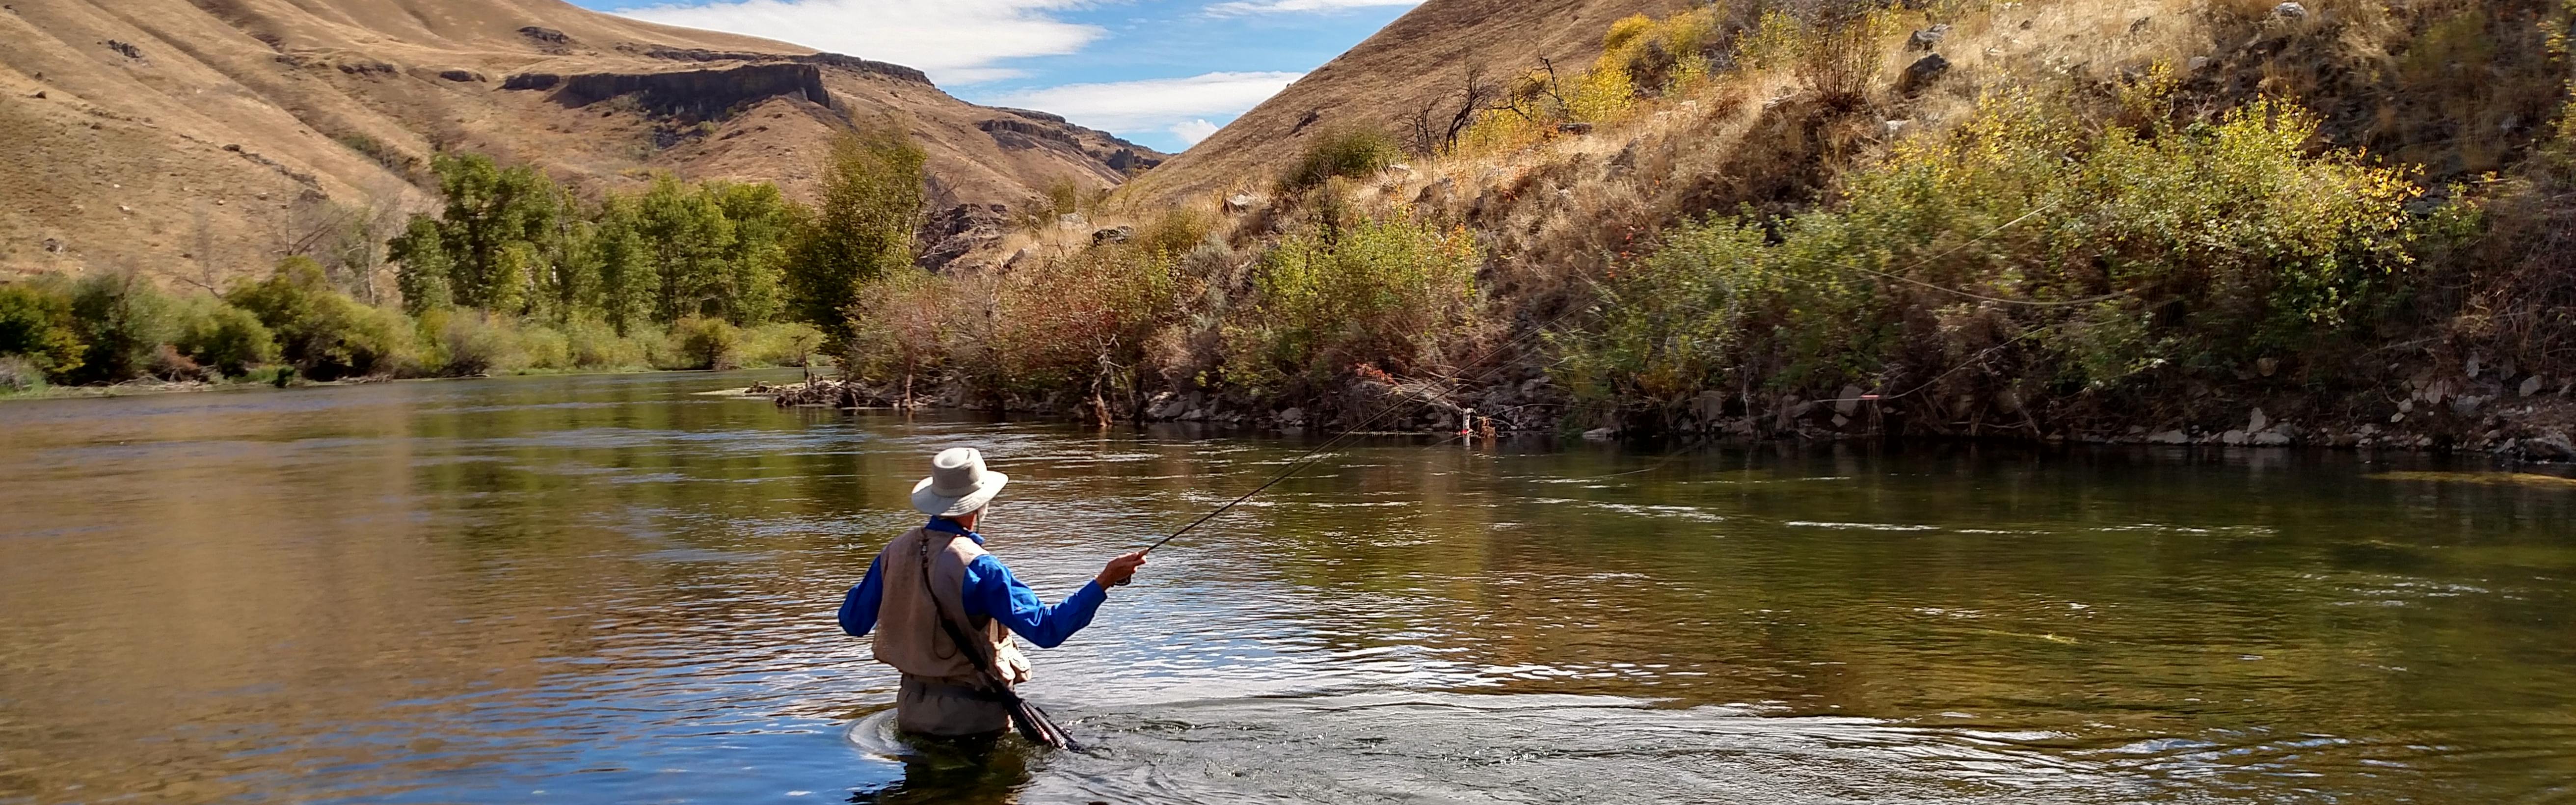 A fly fisher stands in a river with a vest and hat on.